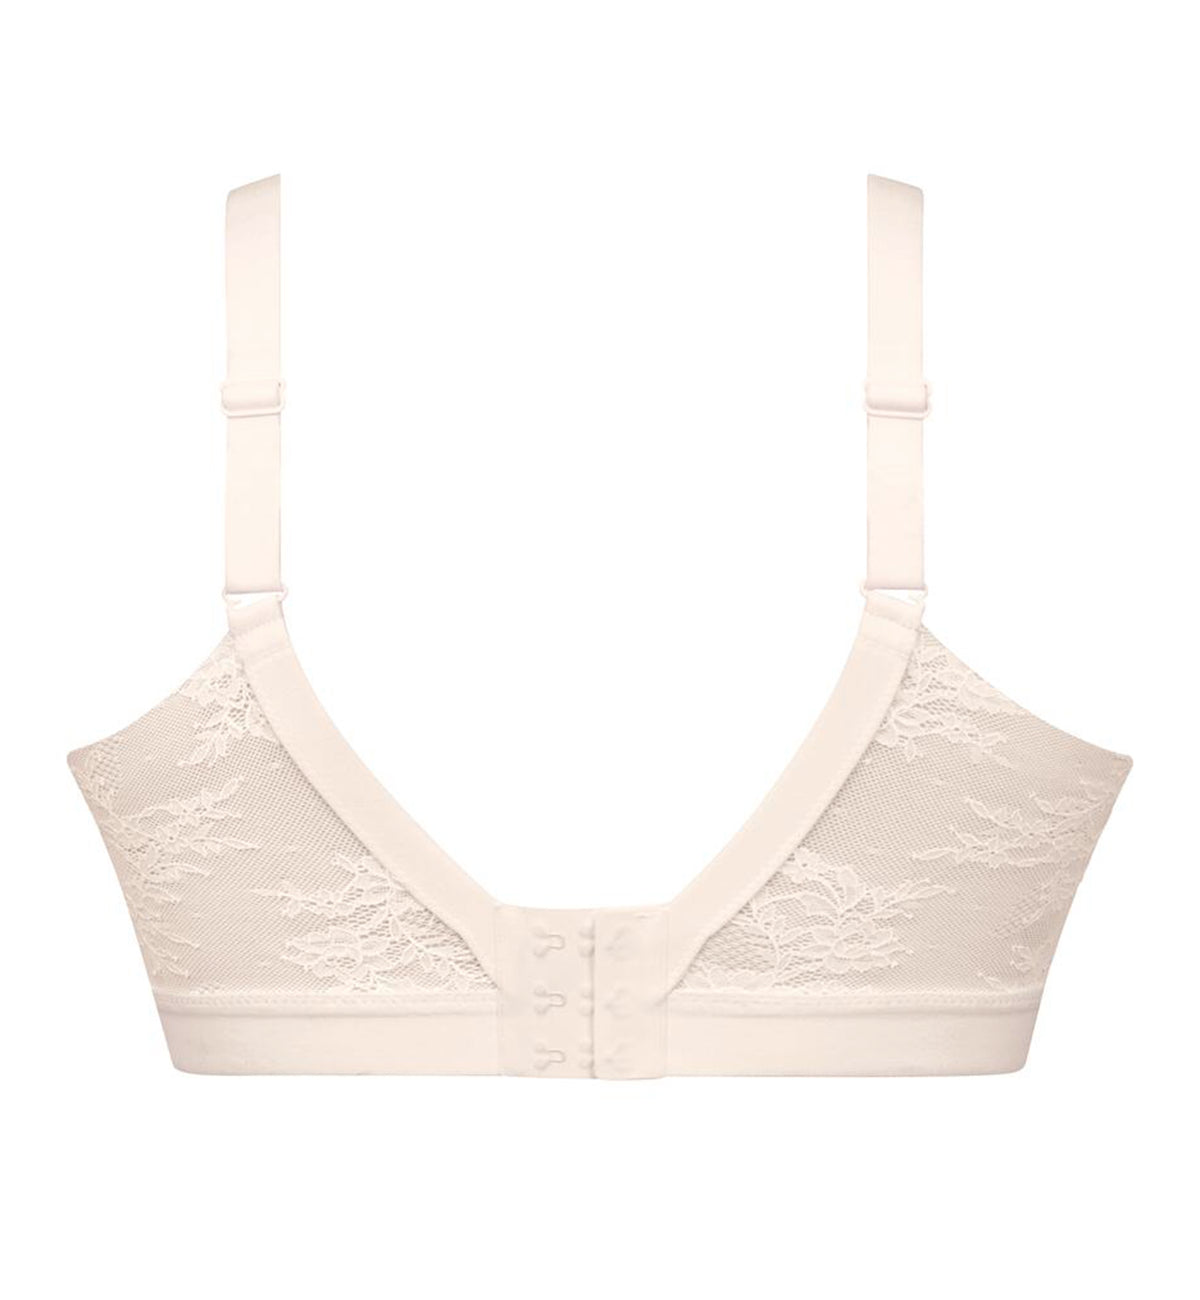 Anita Essential Lace Lightly Padded NURSING Bralette (5057),Small,Crystal - Crystal,Small